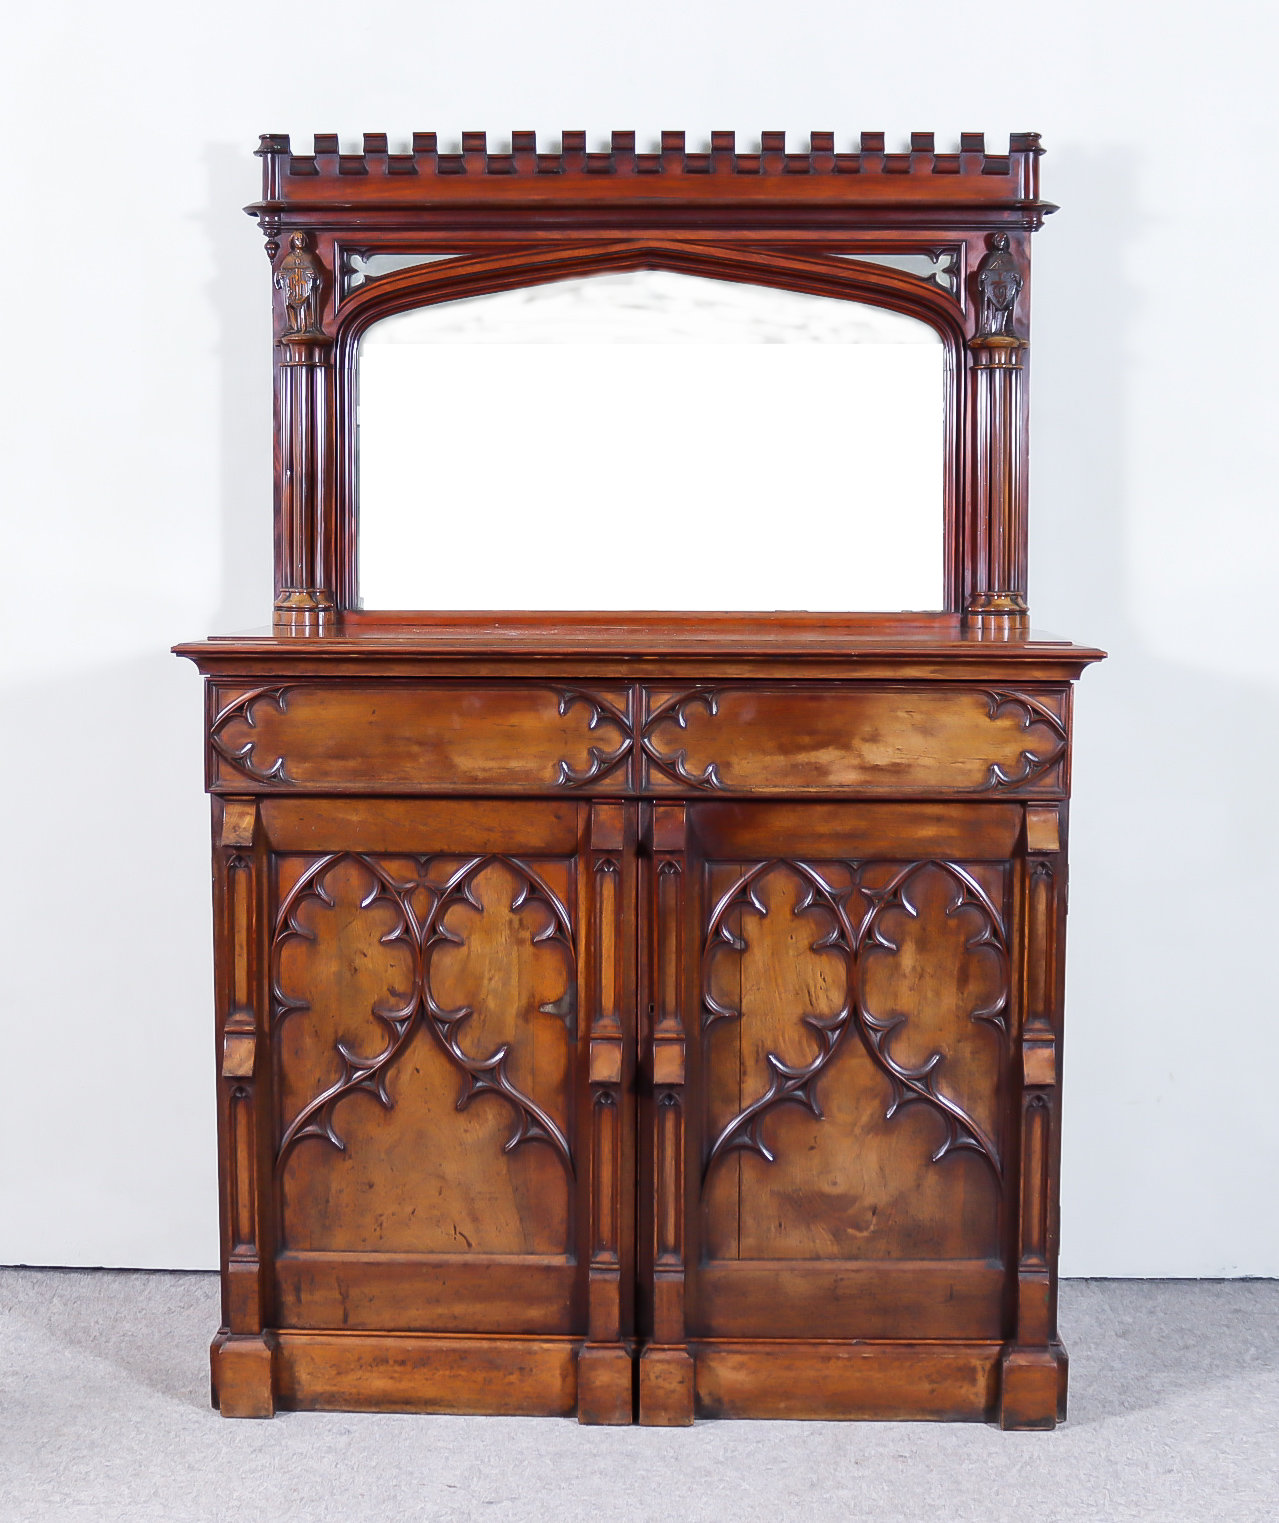 A Victorian Mahogany Gothic Pattern Sideboard, designed by Edward Welby Pugin (1834-1875), for the